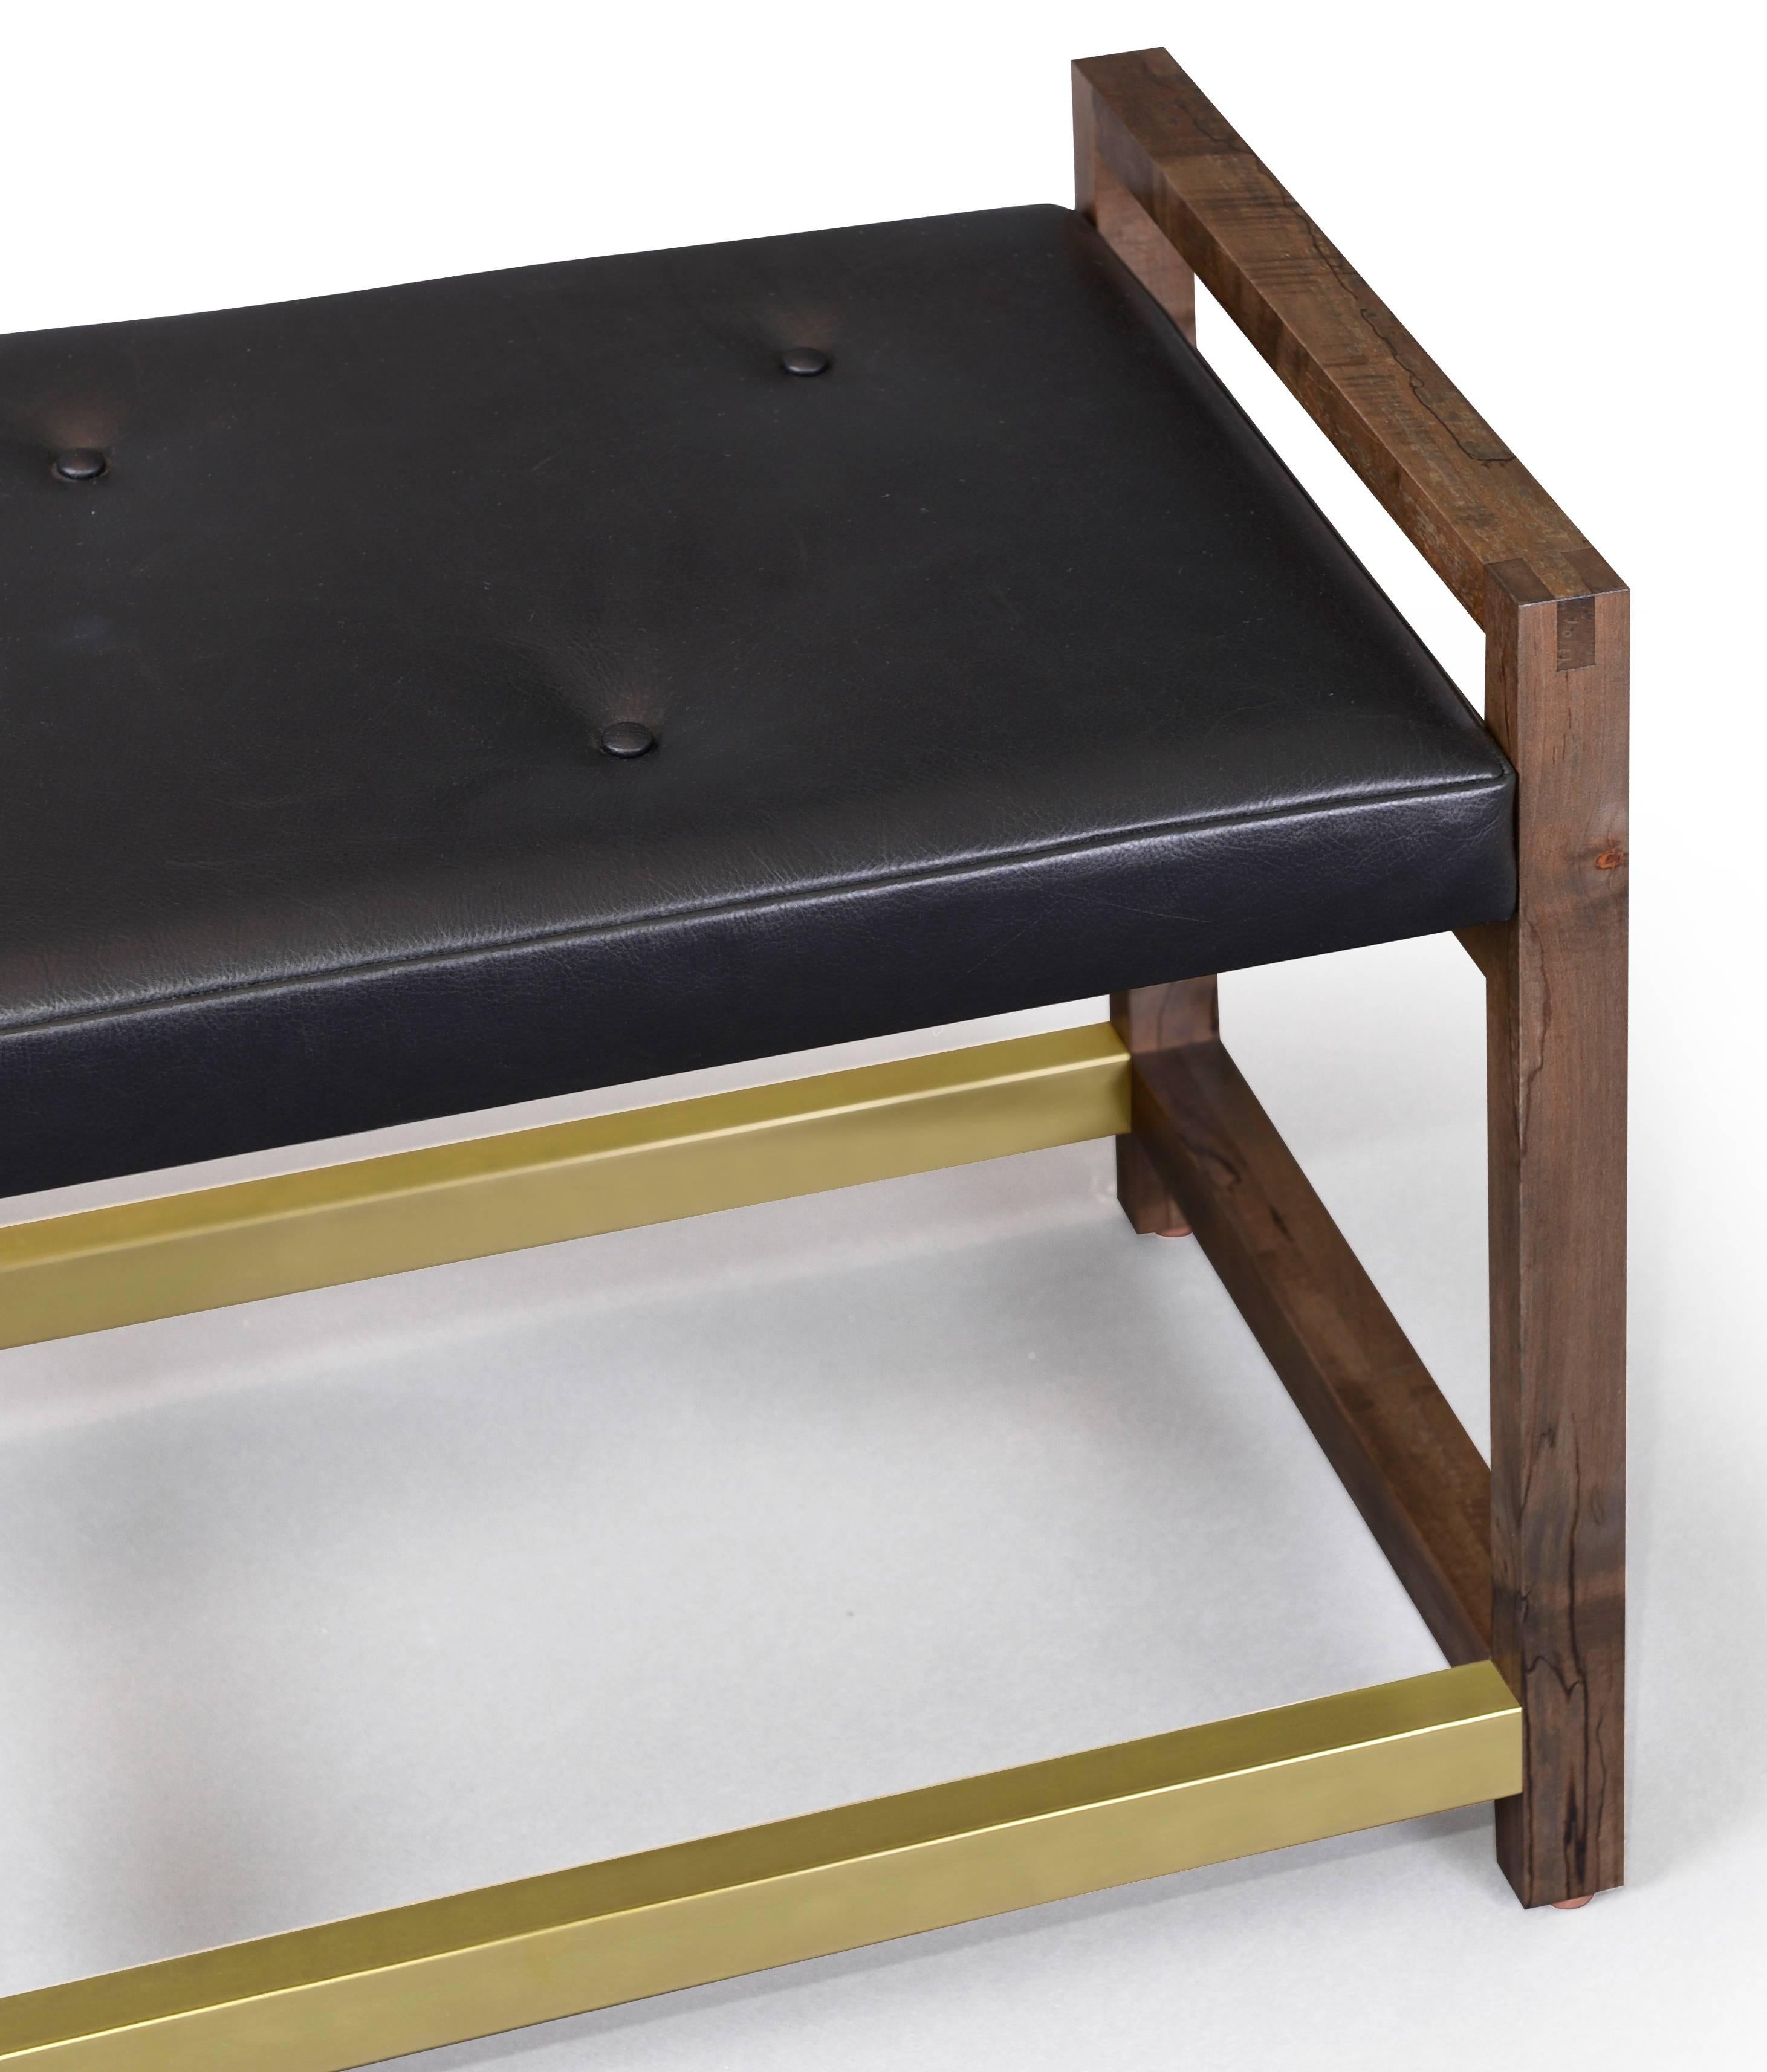 American Gotham Bench - Customizable Wood, Metal and Material